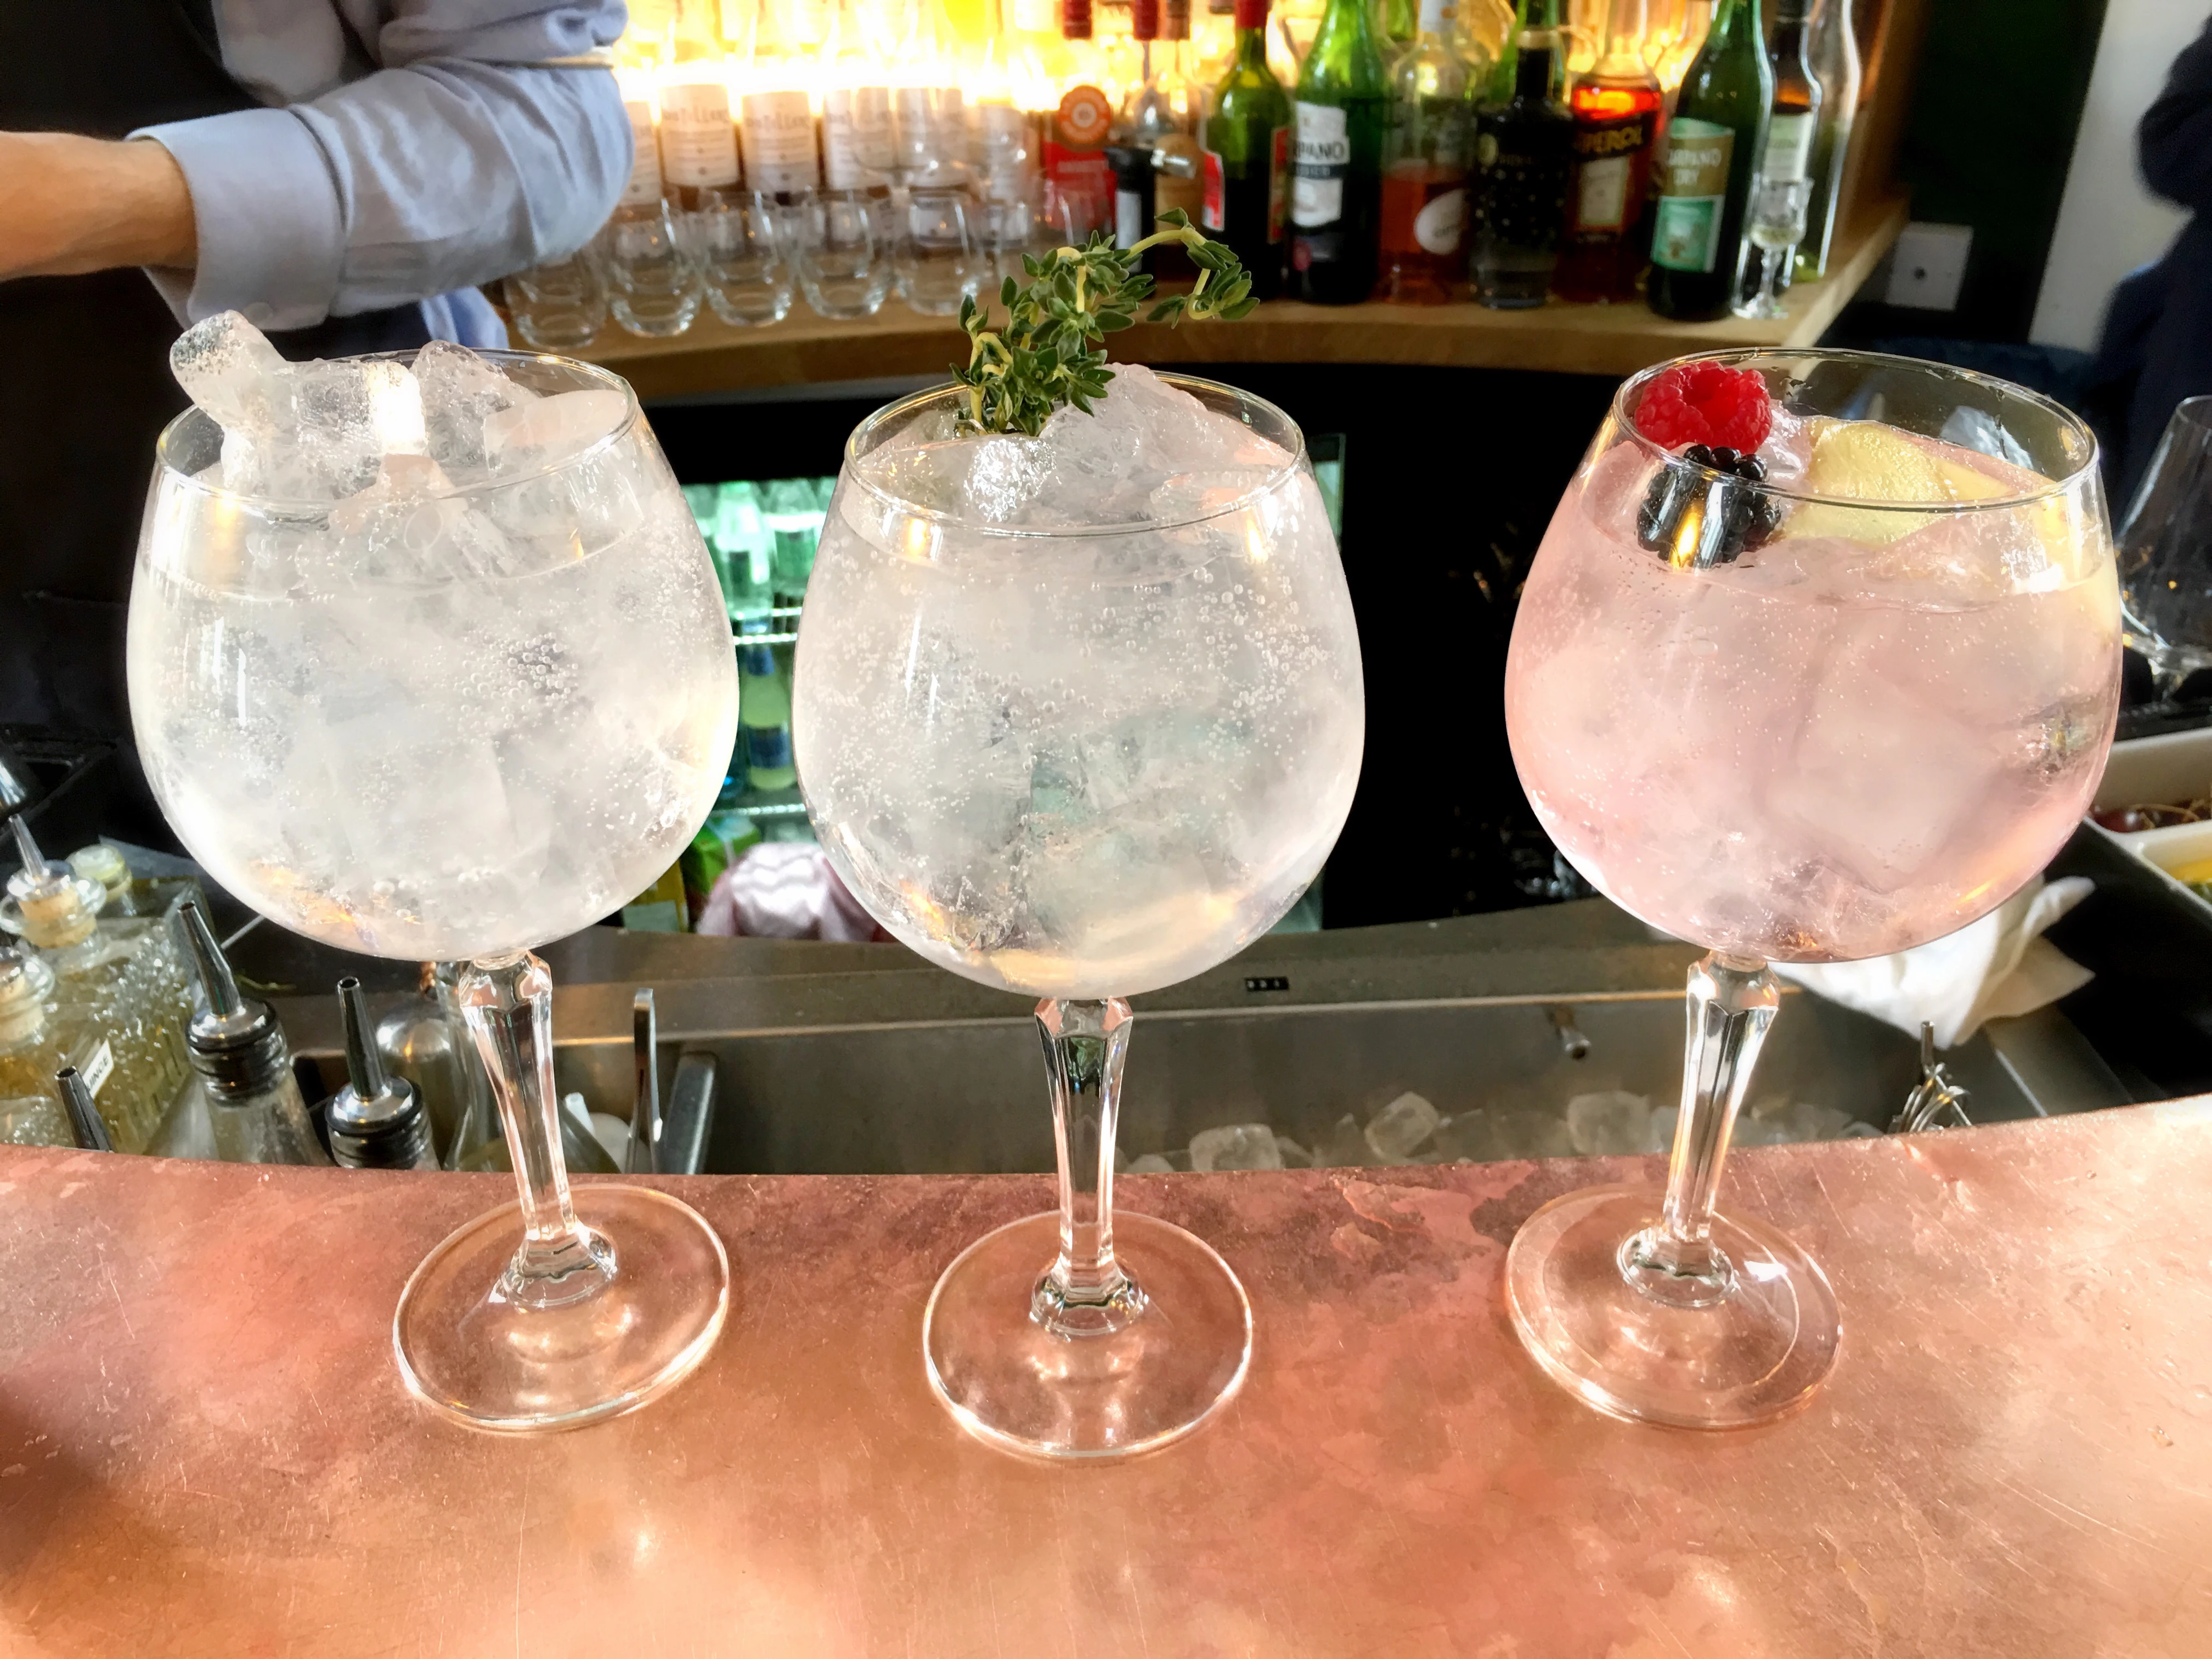 Gin and tonics at the Distillery in London